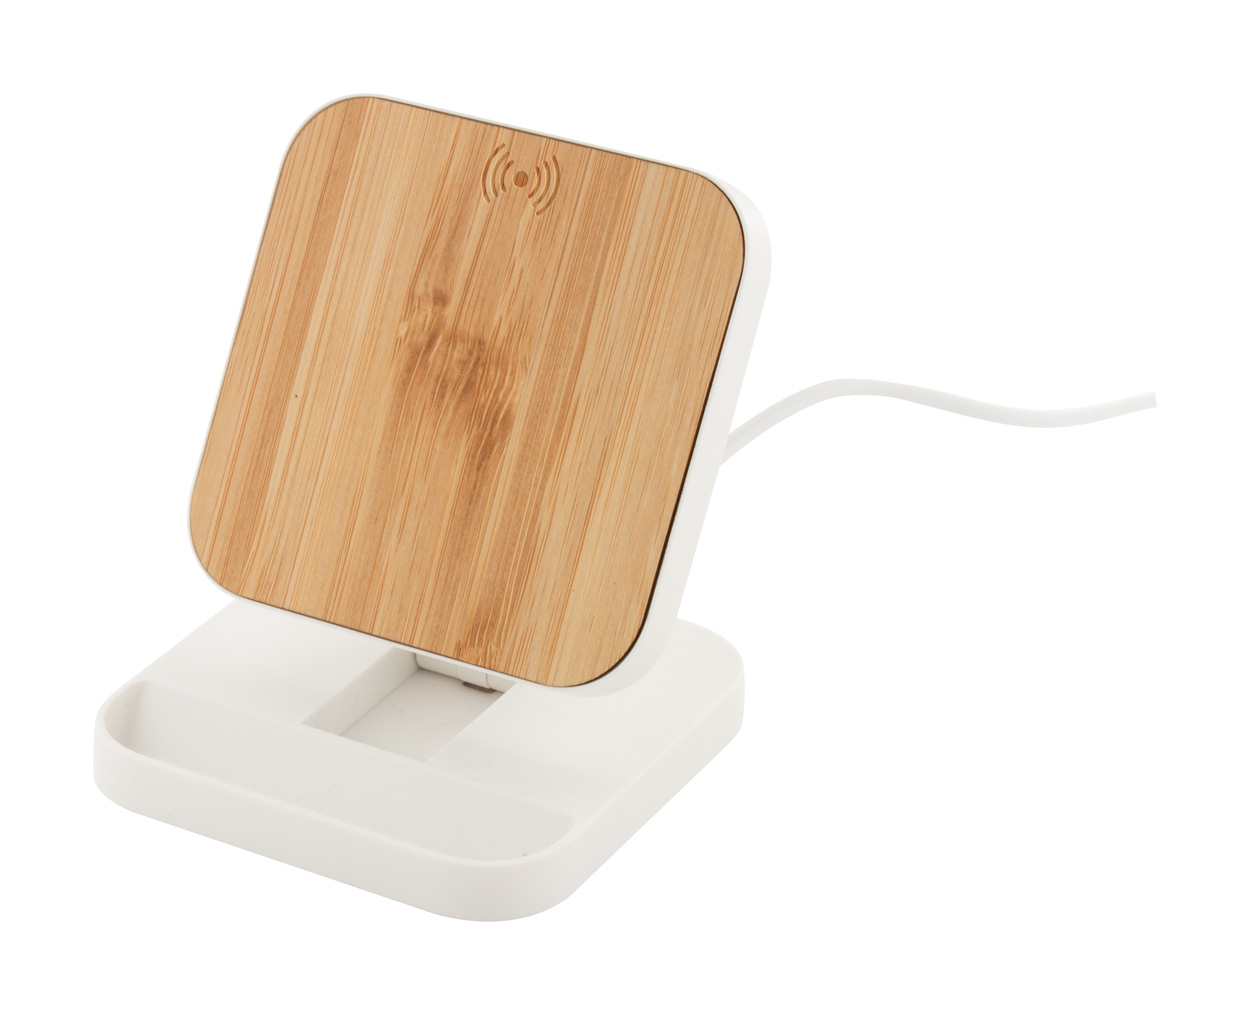 Rabso wireless charger with mobile phone stand - white